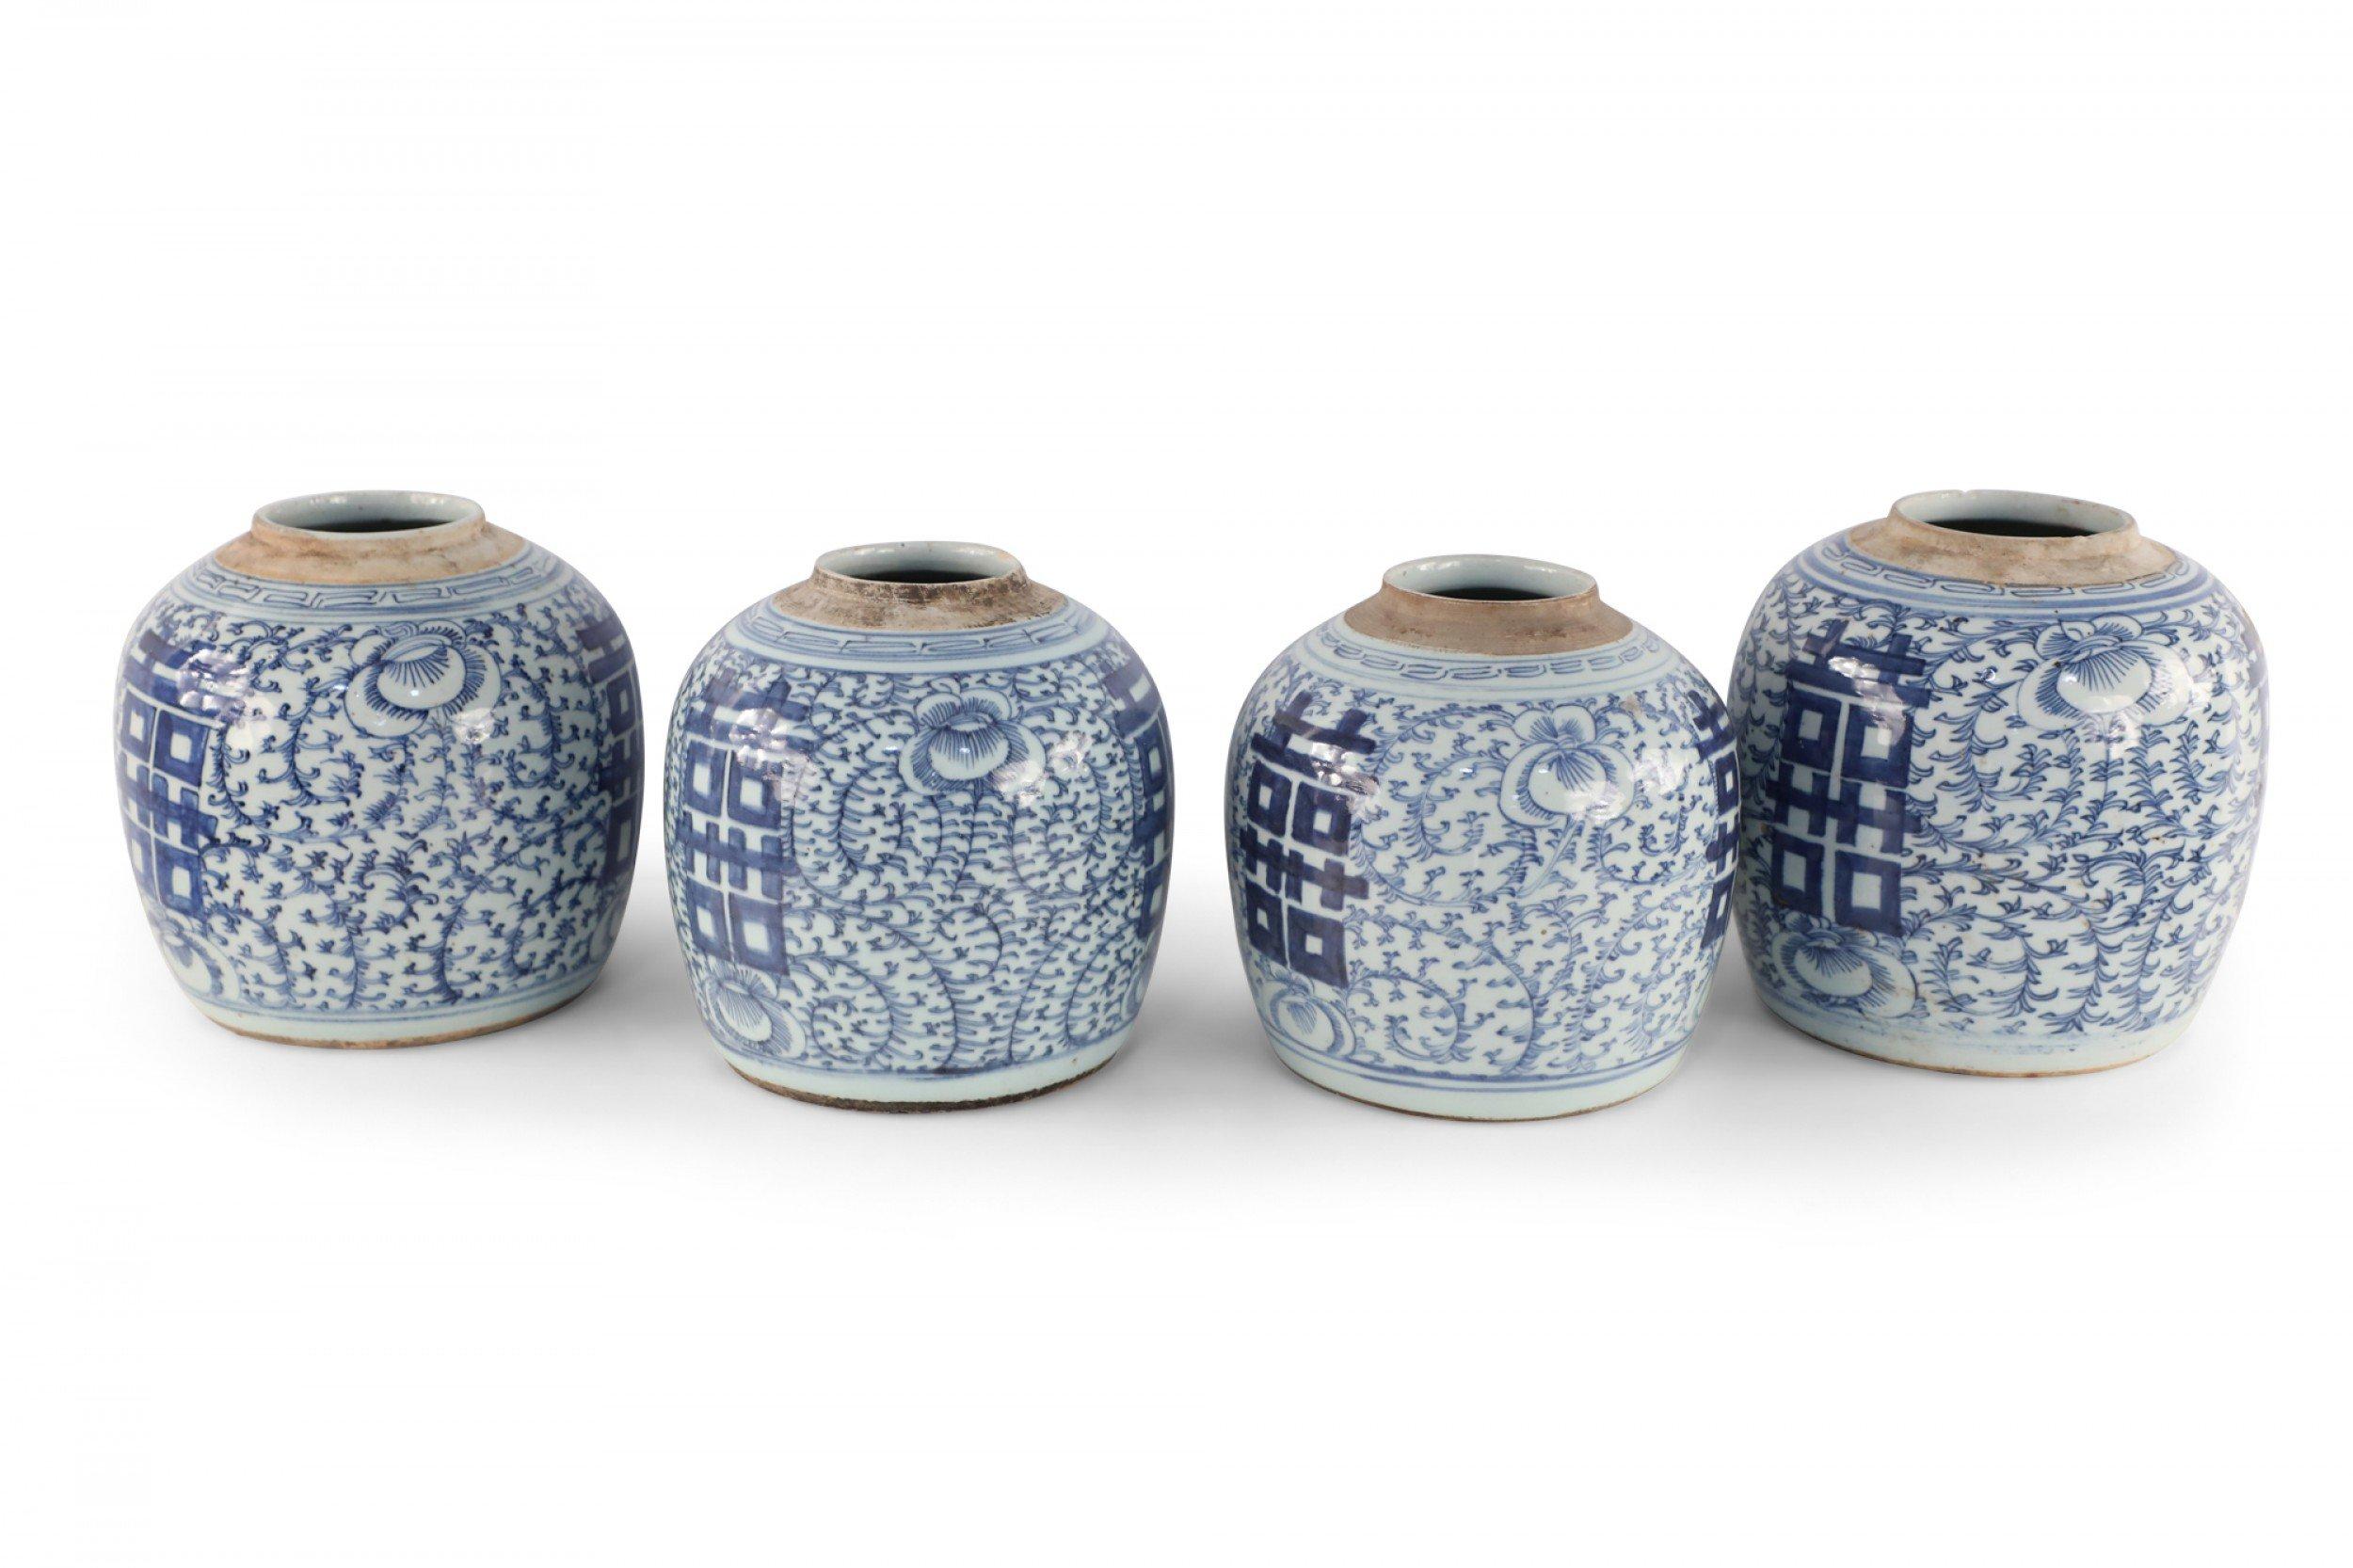 5 antique Chinese (Early 20th Century) similar porcelain ginger jars with blue floral designs around bold, centered characters and geometric bands leading to unglazed rims (jars vary slightly in size, pattern, and color) (Priced each).
 